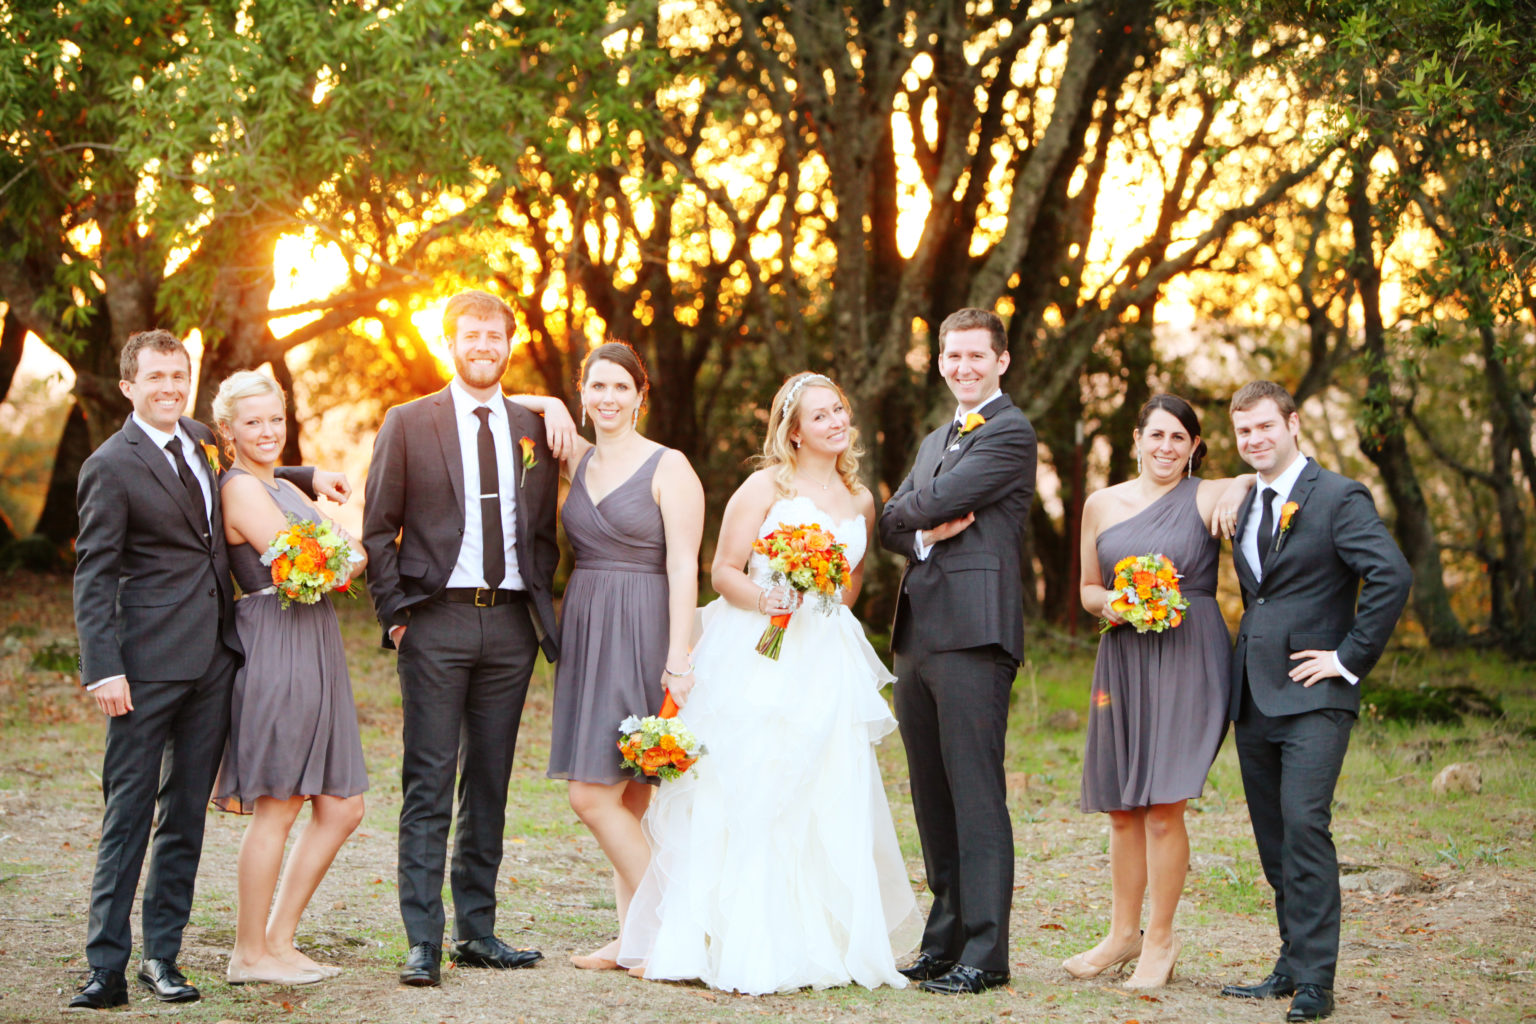 Wedding party smiling for photos in front of oak trees with sunset behind at Paradise Ridge winery